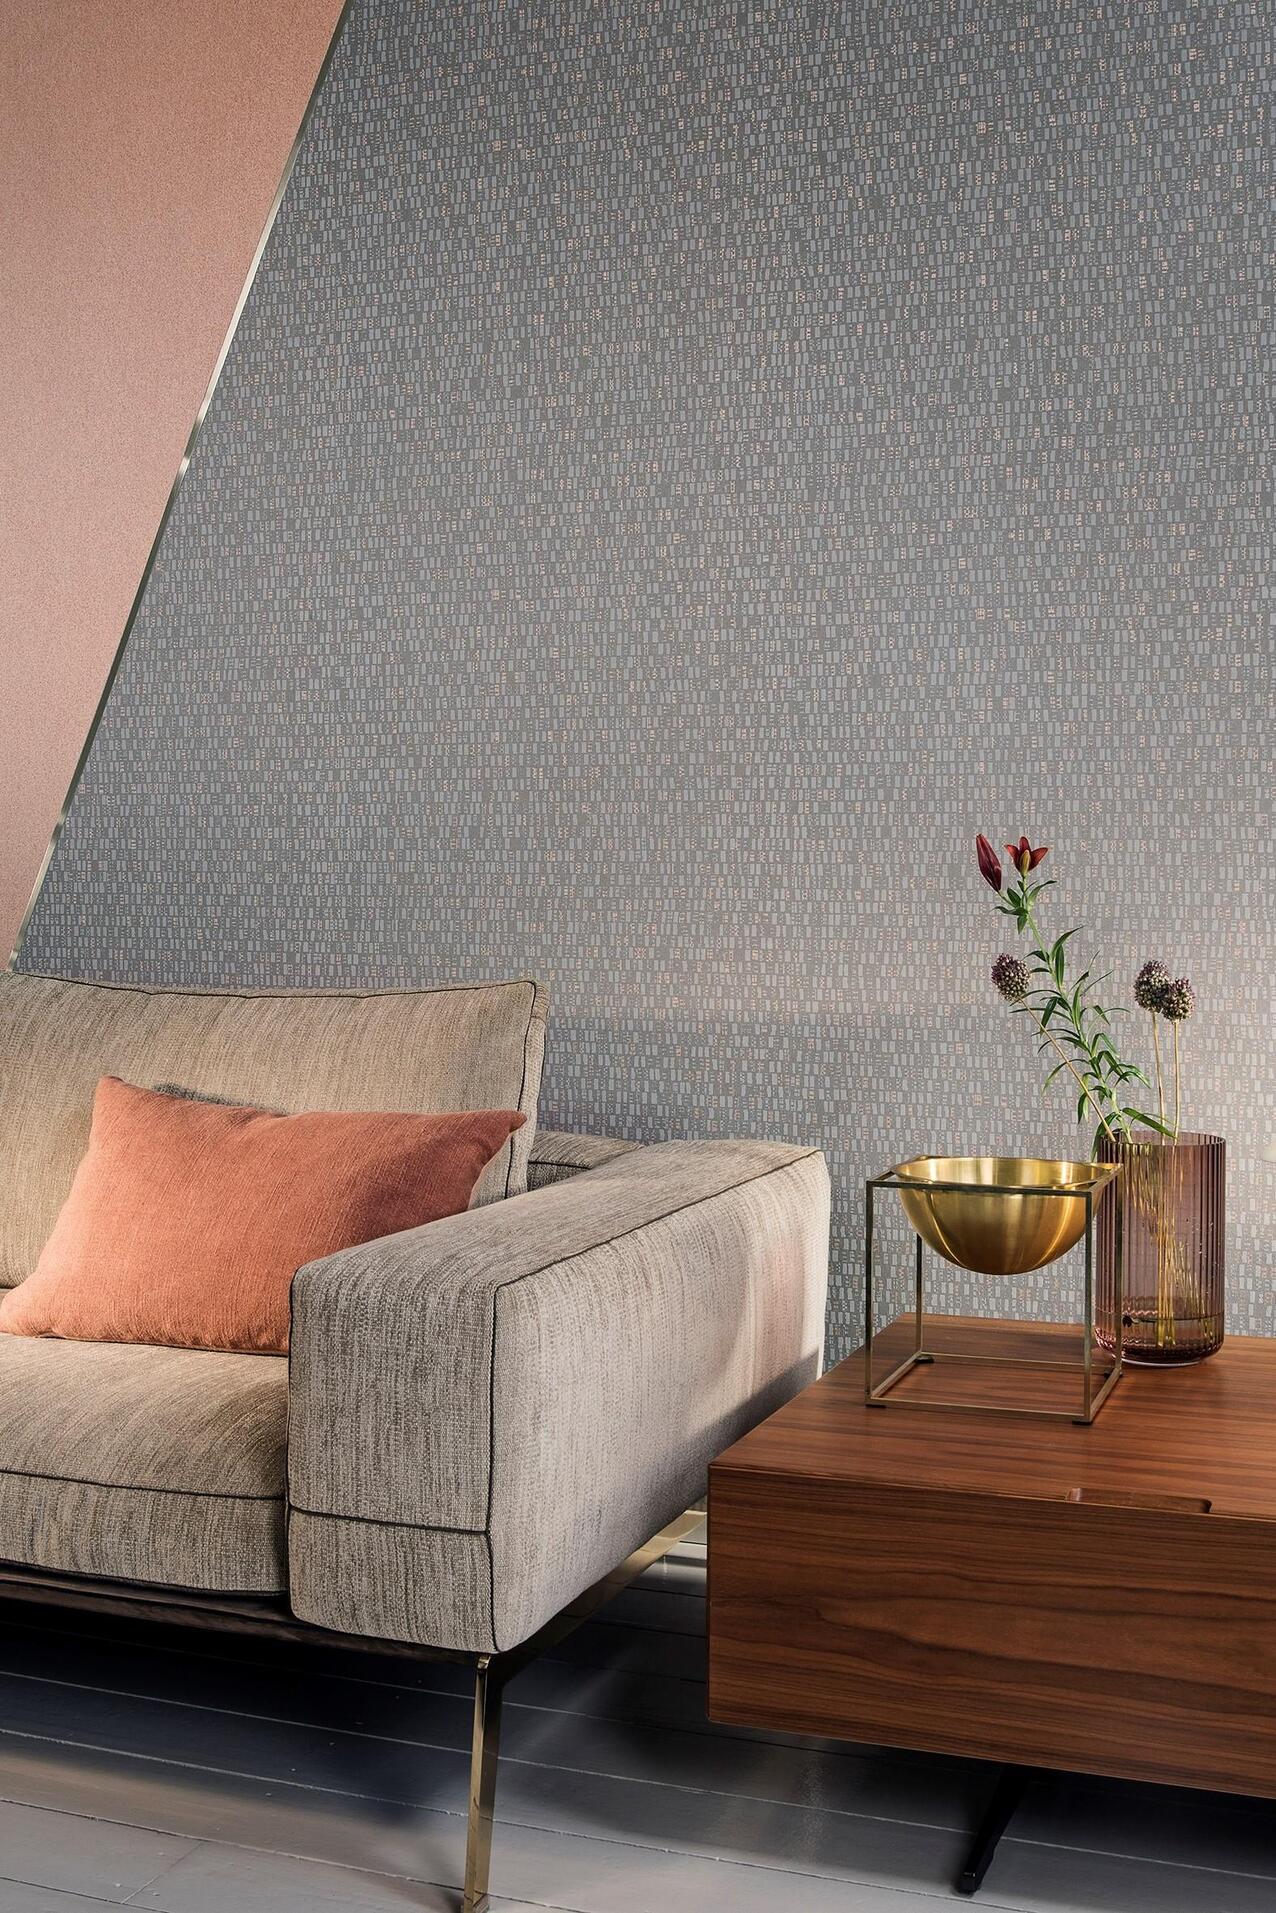 hooked-on-walls-classy-vibes-beat-wallcovering